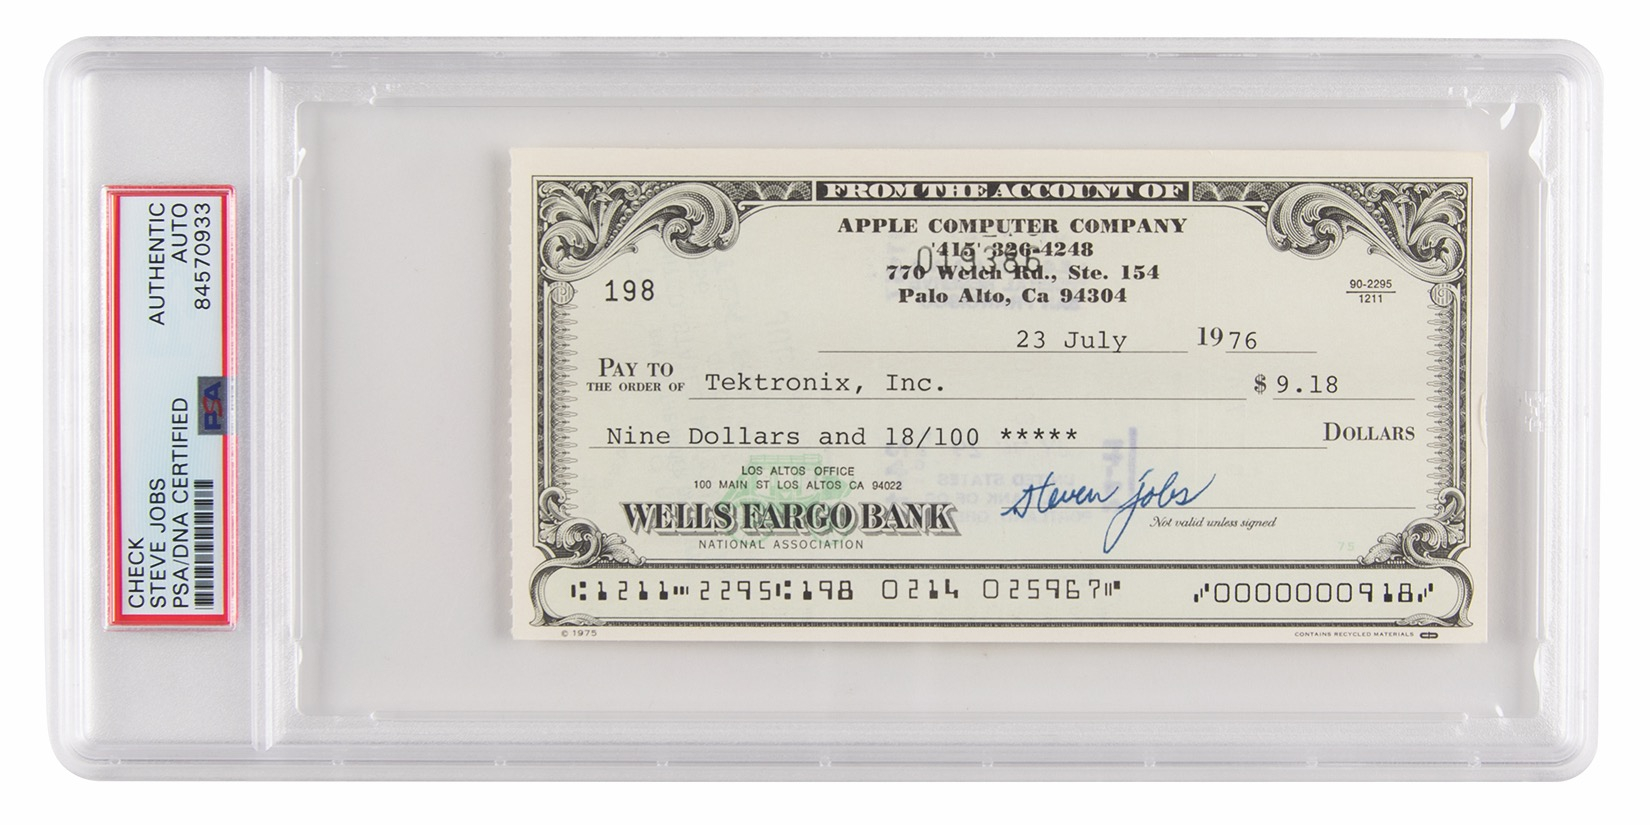 Rare Steve Jobs check for $9.18 goes under the hammer, could fetch $25k |  iMore